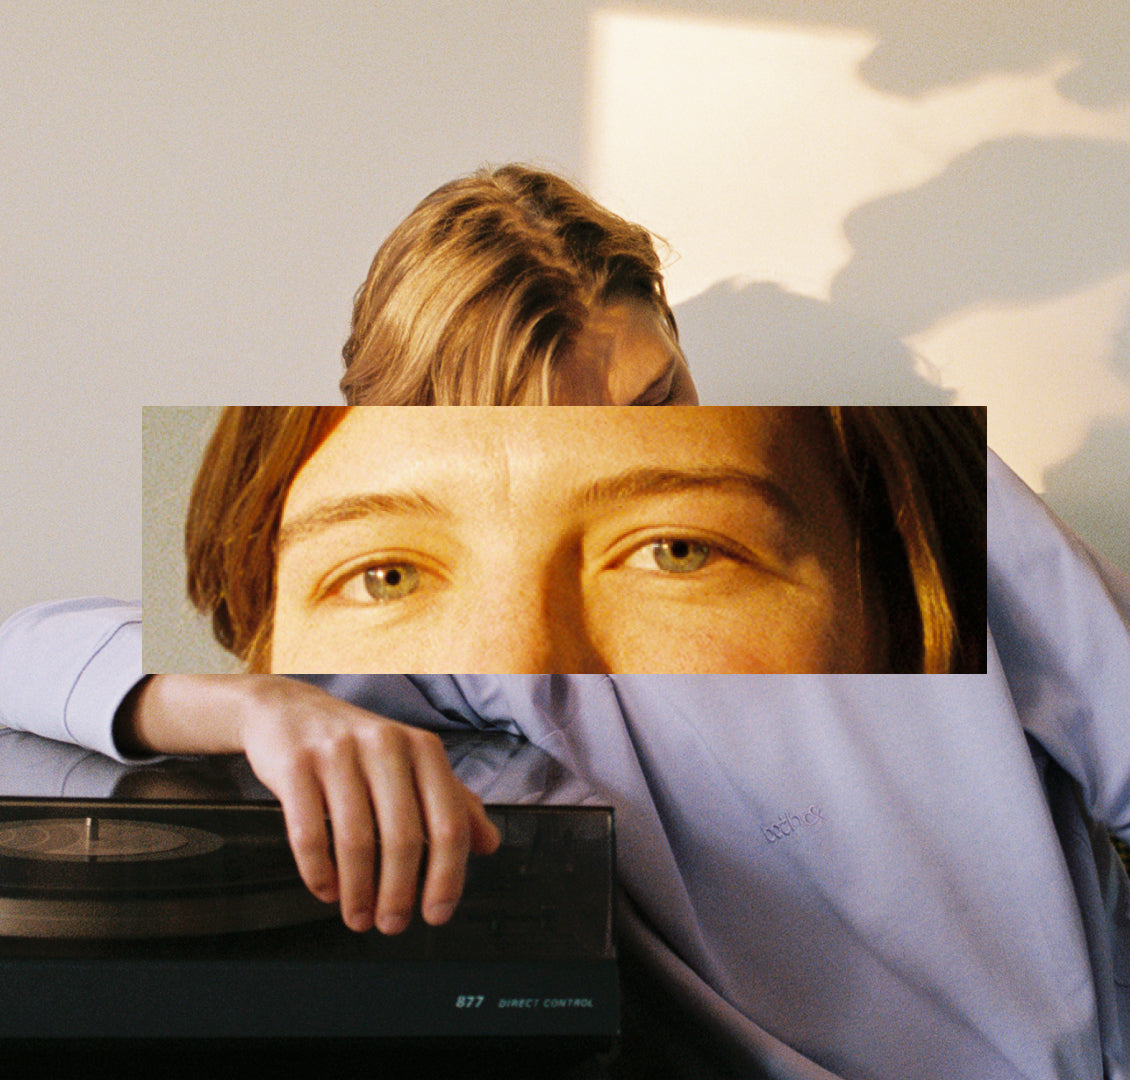 Collage: cropped eyes against a transmasc person sitting and leaning against a record player at golden hour